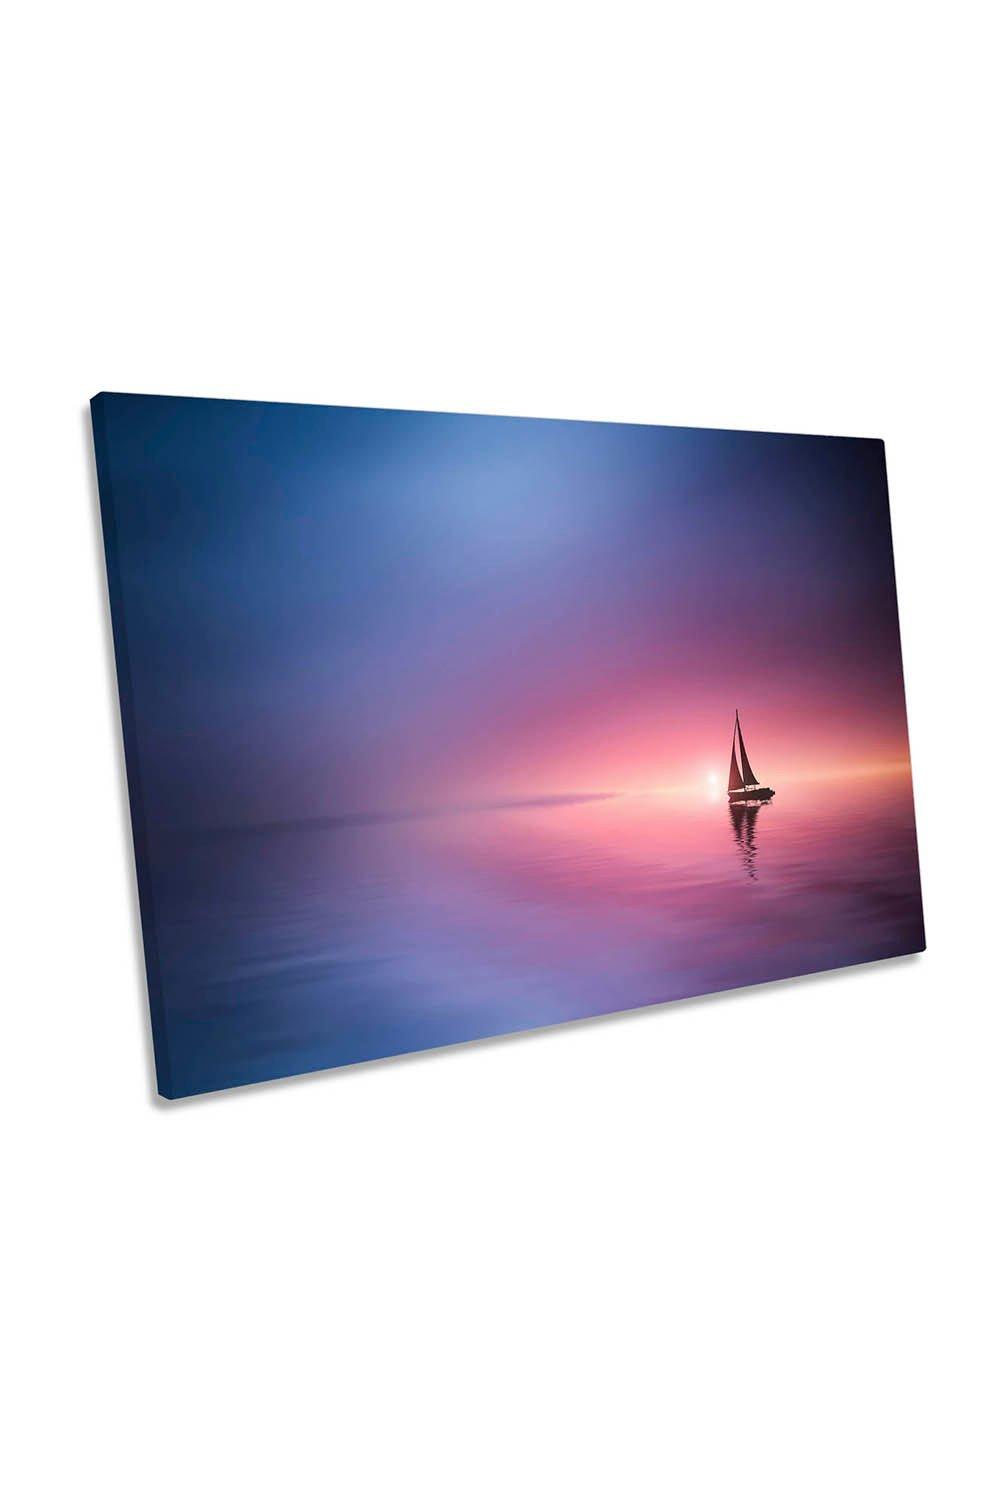 Sailing across the Lake Sunset Boat Canvas Wall Art Picture Print